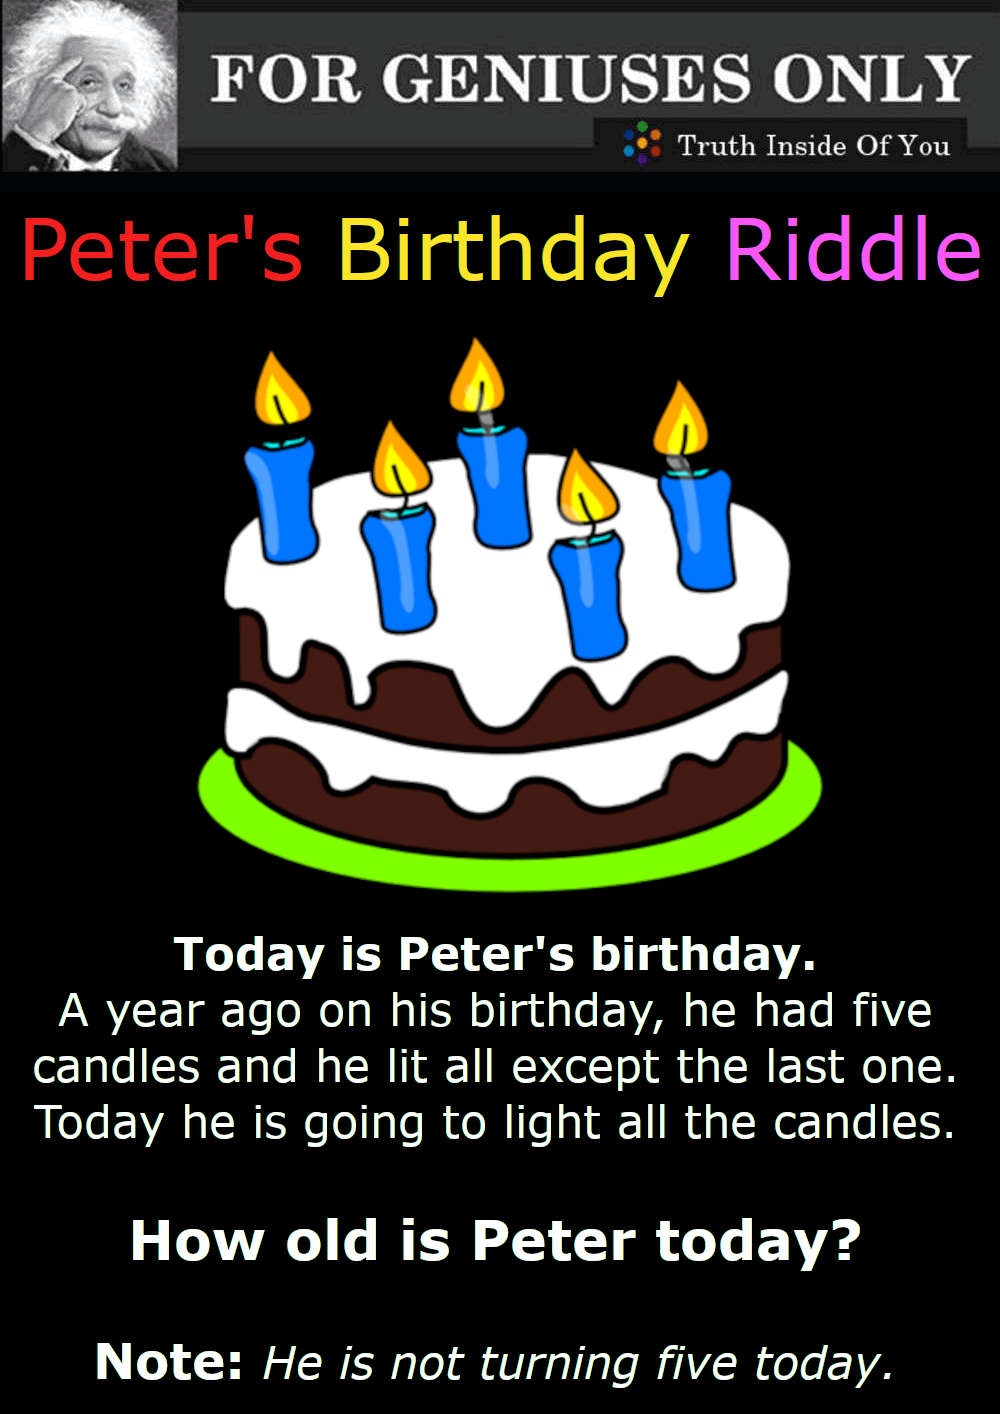 Peter's Birthday Riddle